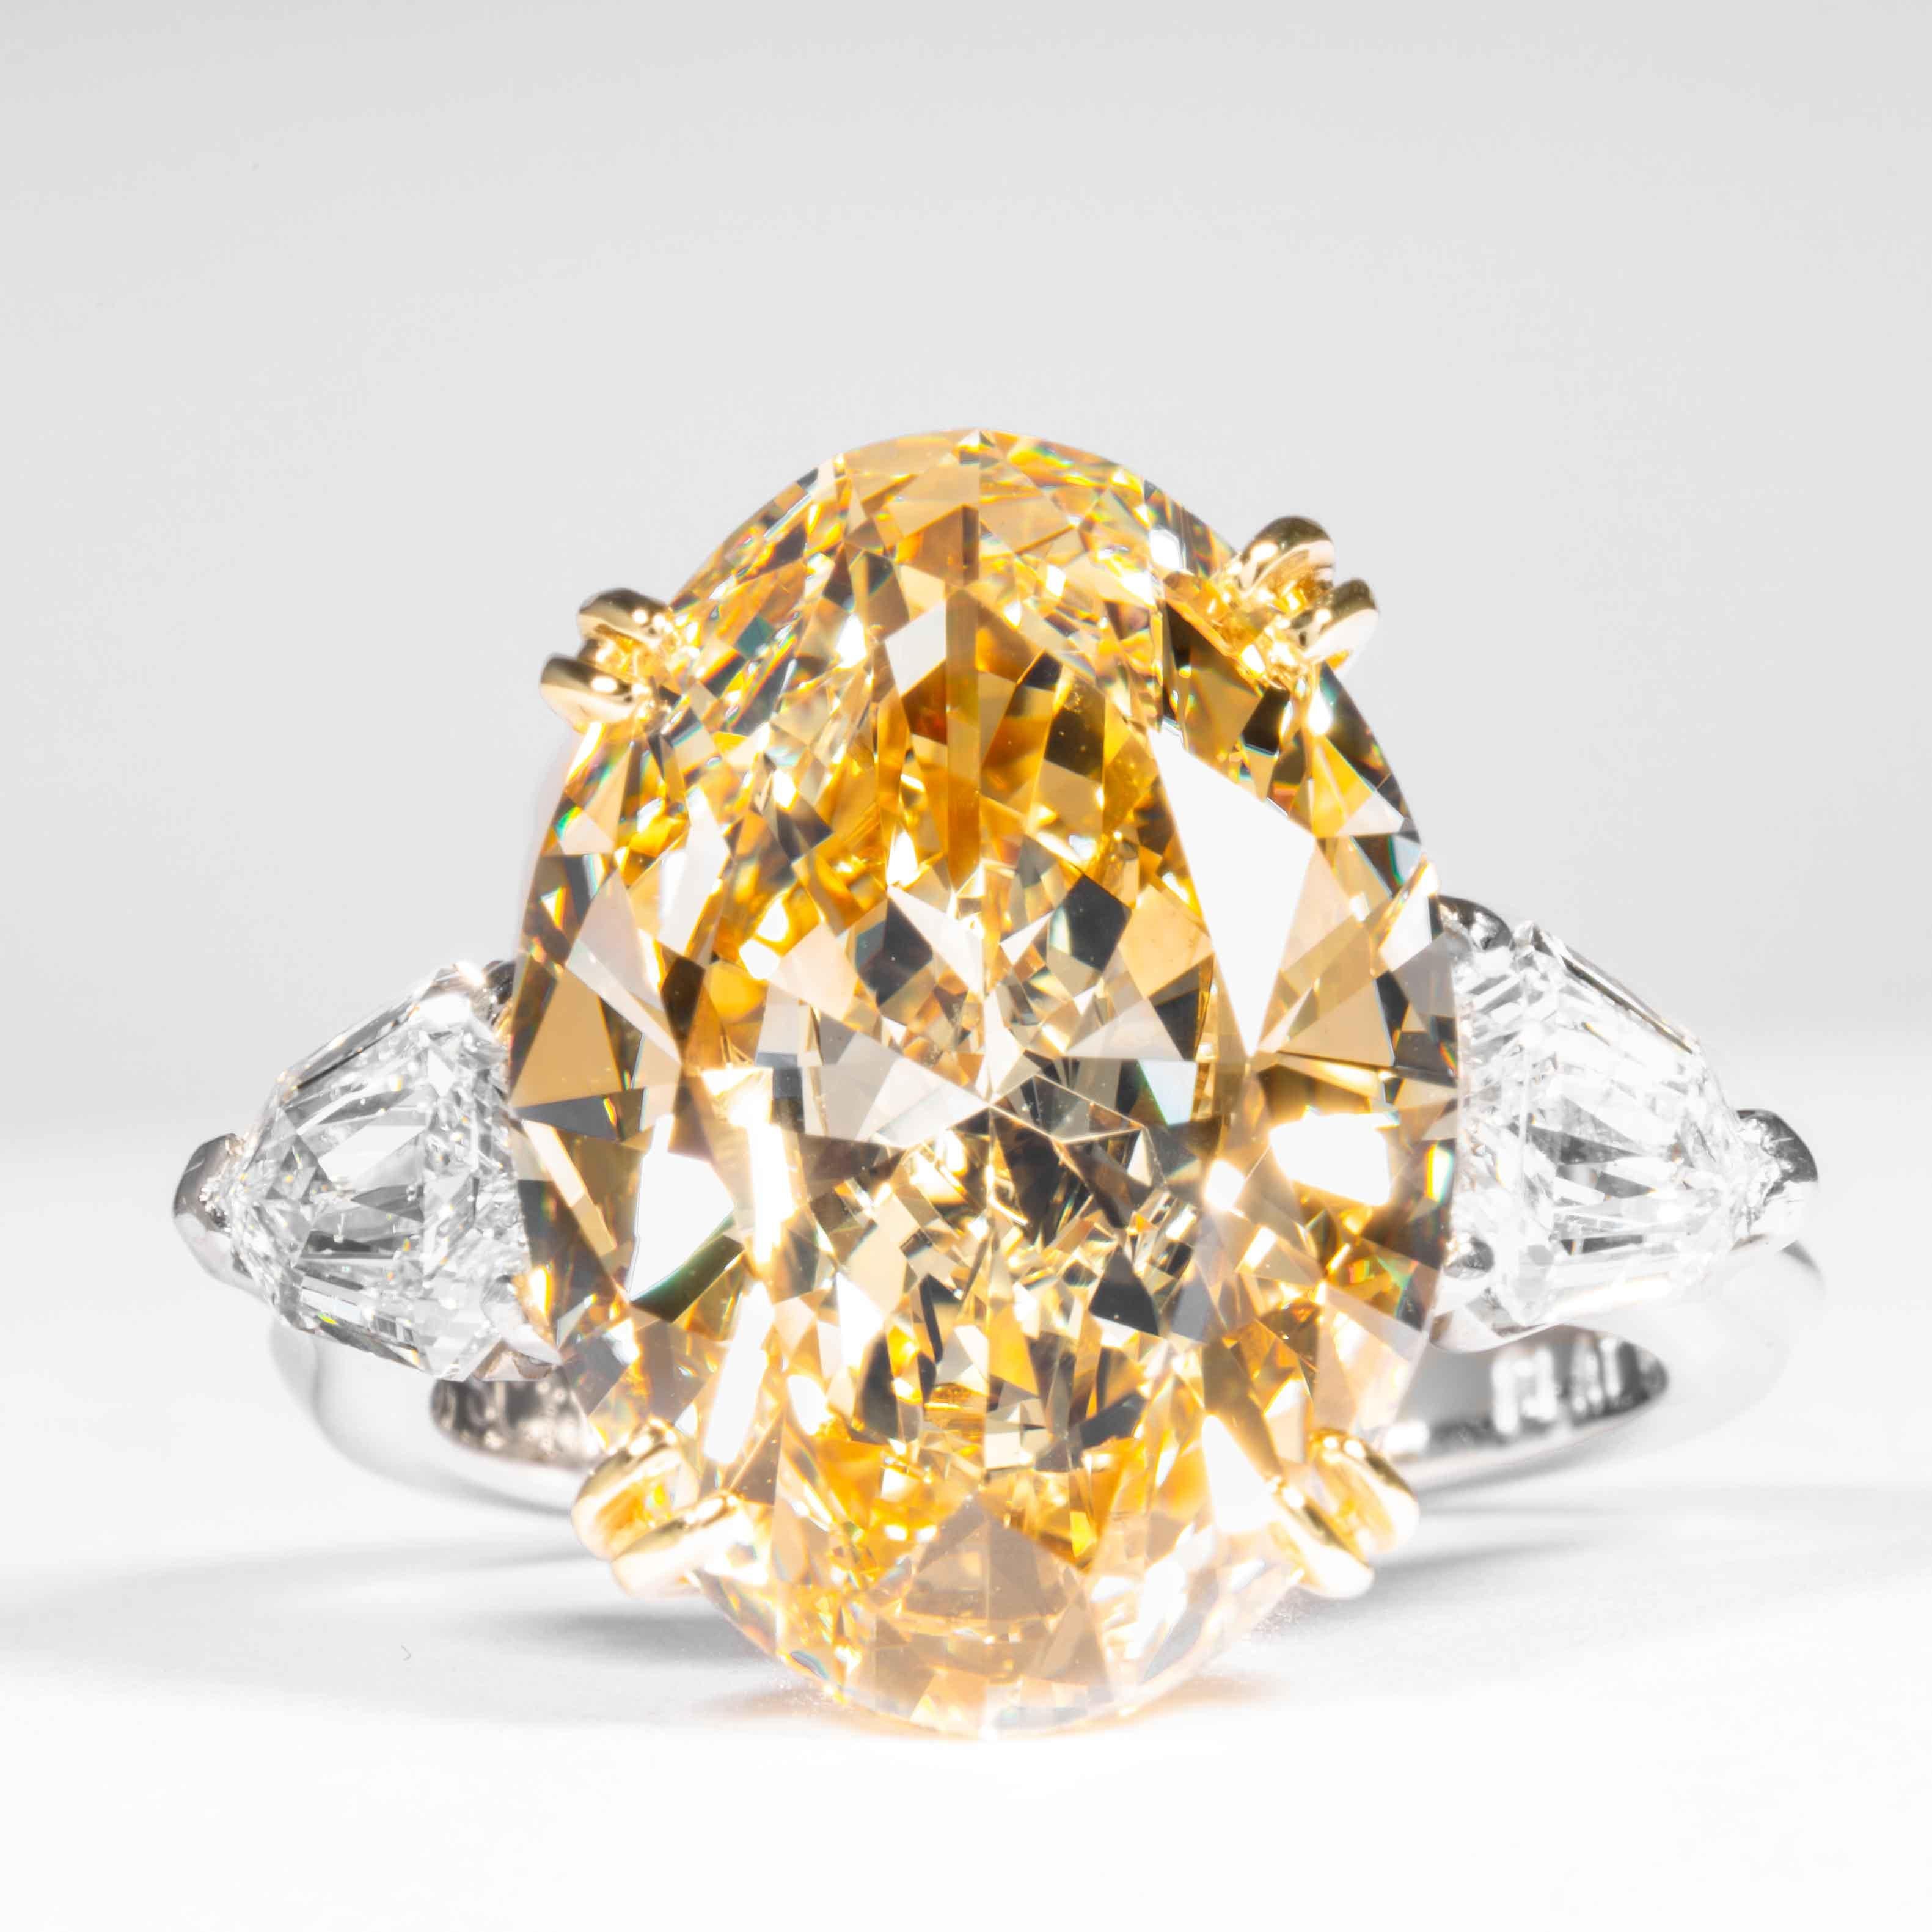 This fancy yellow oval cut diamond is offered by Shreve, Crump & Low.  This fancy yellow oval diamond is custom set in a handcrafted Shreve, Crump & Low platinum and 18 karat yellow gold 3 stone ring consisting of 1 oval cut yellow diamond weighing